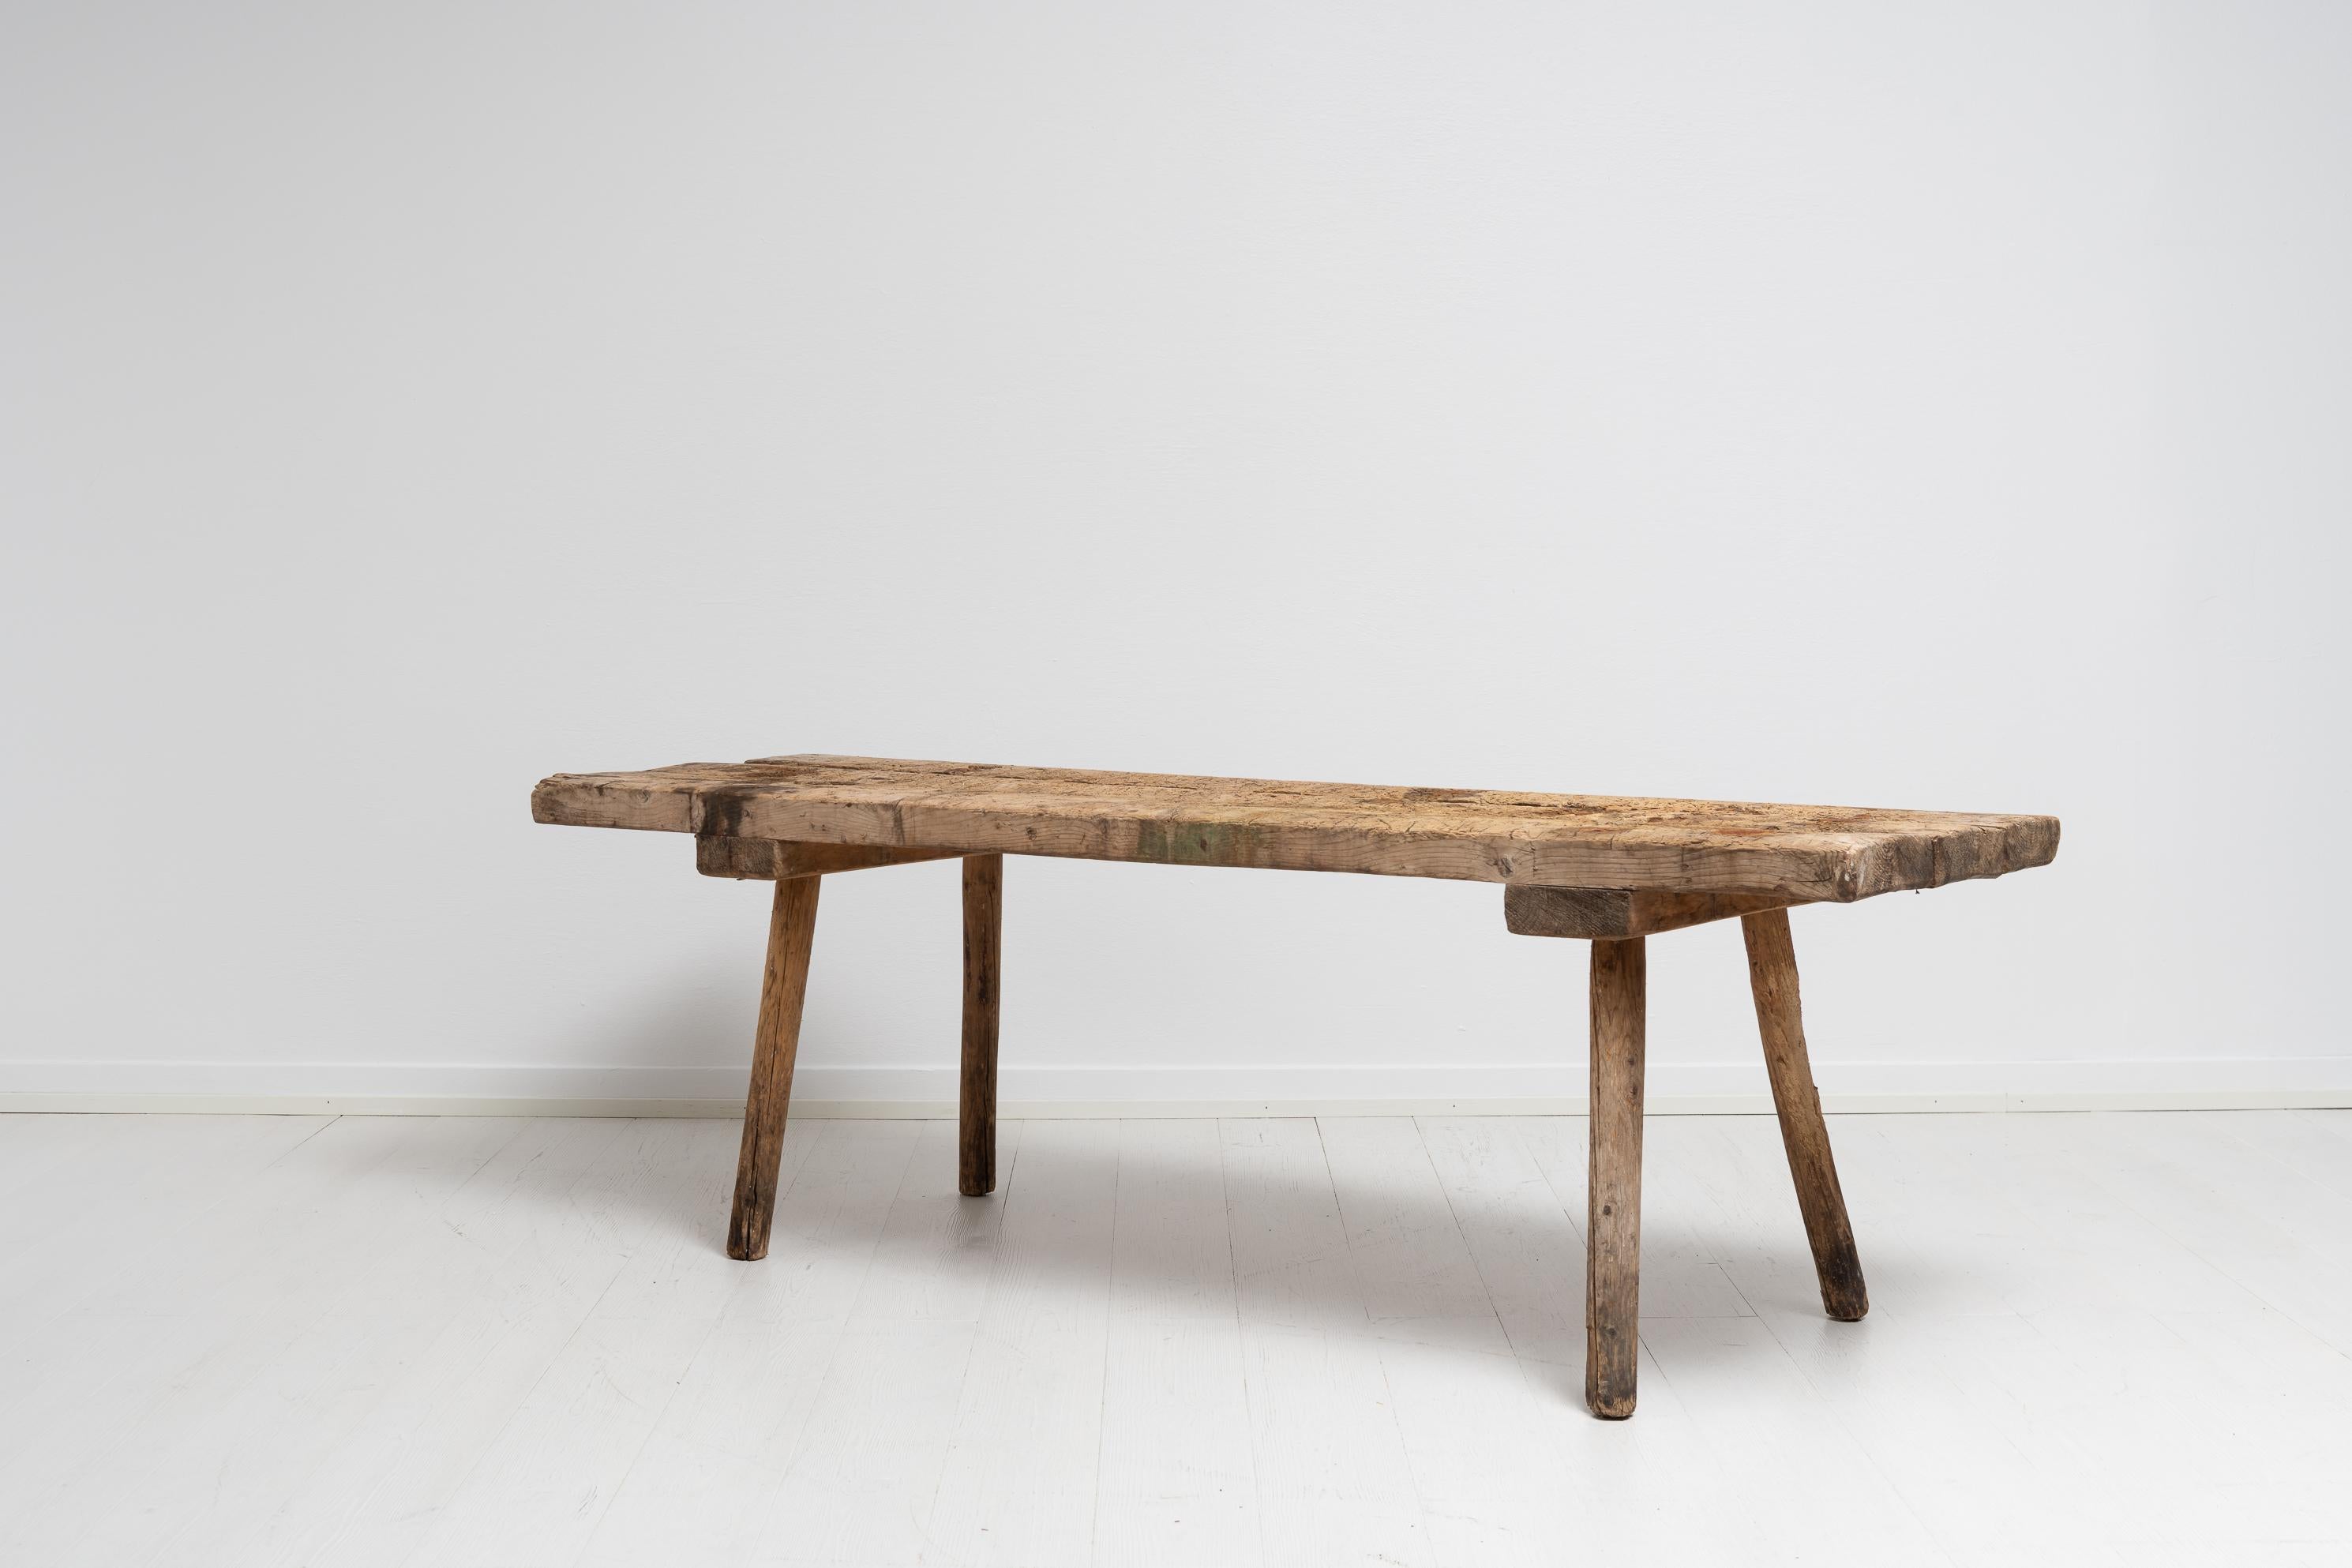 Pine Early 19th Century Swedish Folk Art Rustic Work Bench Coffee Table For Sale